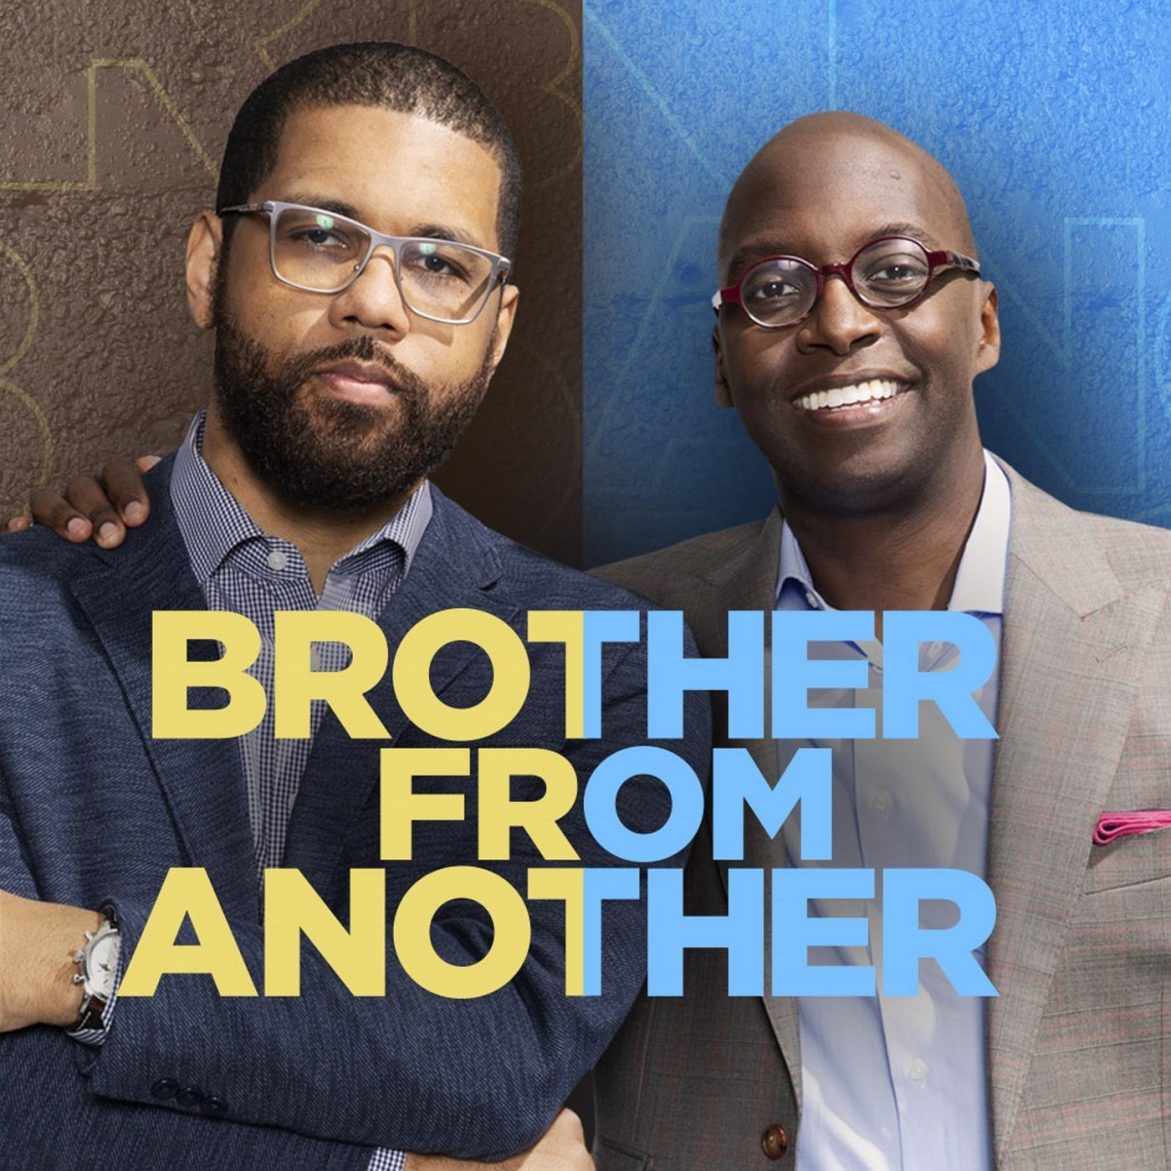 Black Podcasting - "The Best Man: The Final Chapters" Malcolm D. Lee Interview | Brother From Another